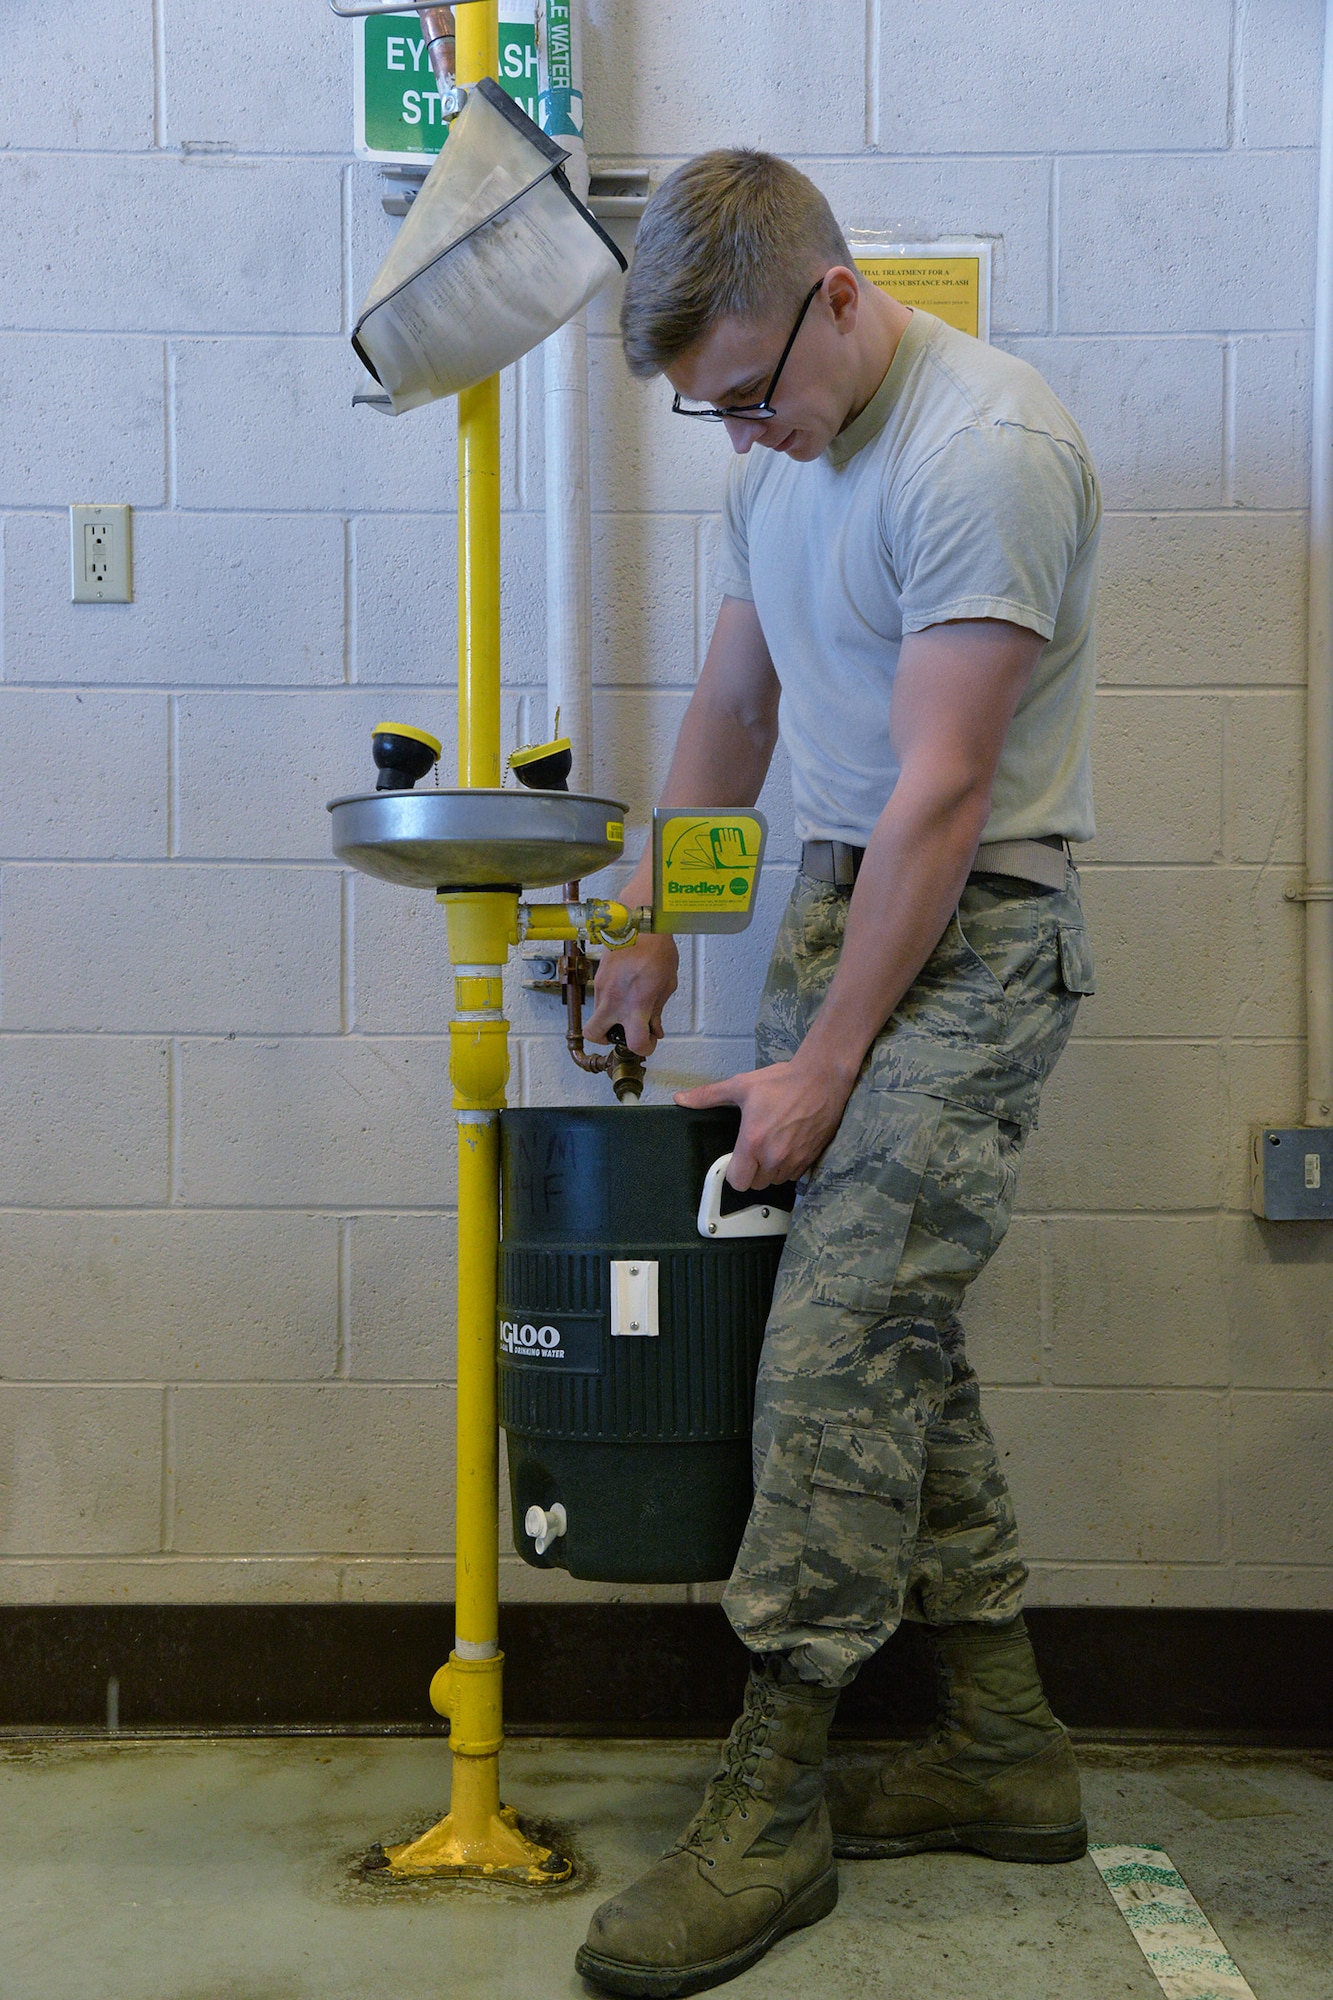 Airman 1st Class Nicolas Haneline, 341st Missile Maintenance Squadron maintenance technician, fills a water container before heading out to the missile field Jan. 17, 2017, at Malmstrom Air Force Base, Mont. Before each shift, teams load up a maintenance van with needed equipment and tools to be able to effectively work in Malmstrom’s missile complex. (U.S. Air Force photo/Airman 1st Class Daniel Brosam)